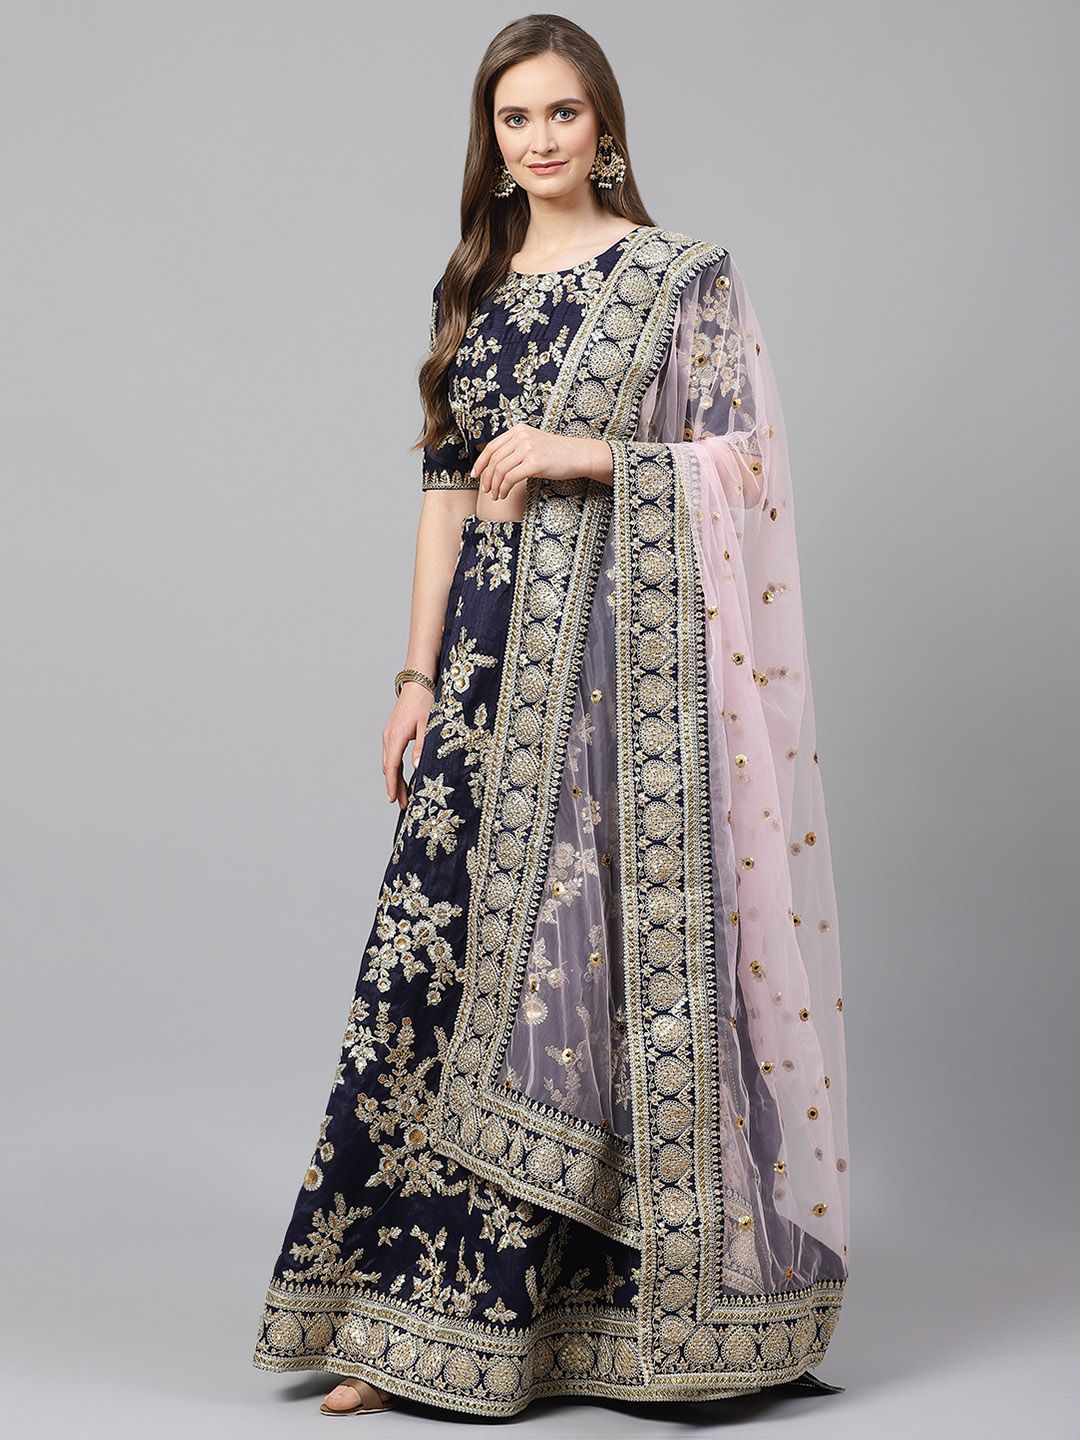 Readiprint Fashions Navy Blue & Golden Semi-Stitched & Unstitched Blouse with Dupatta Price in India